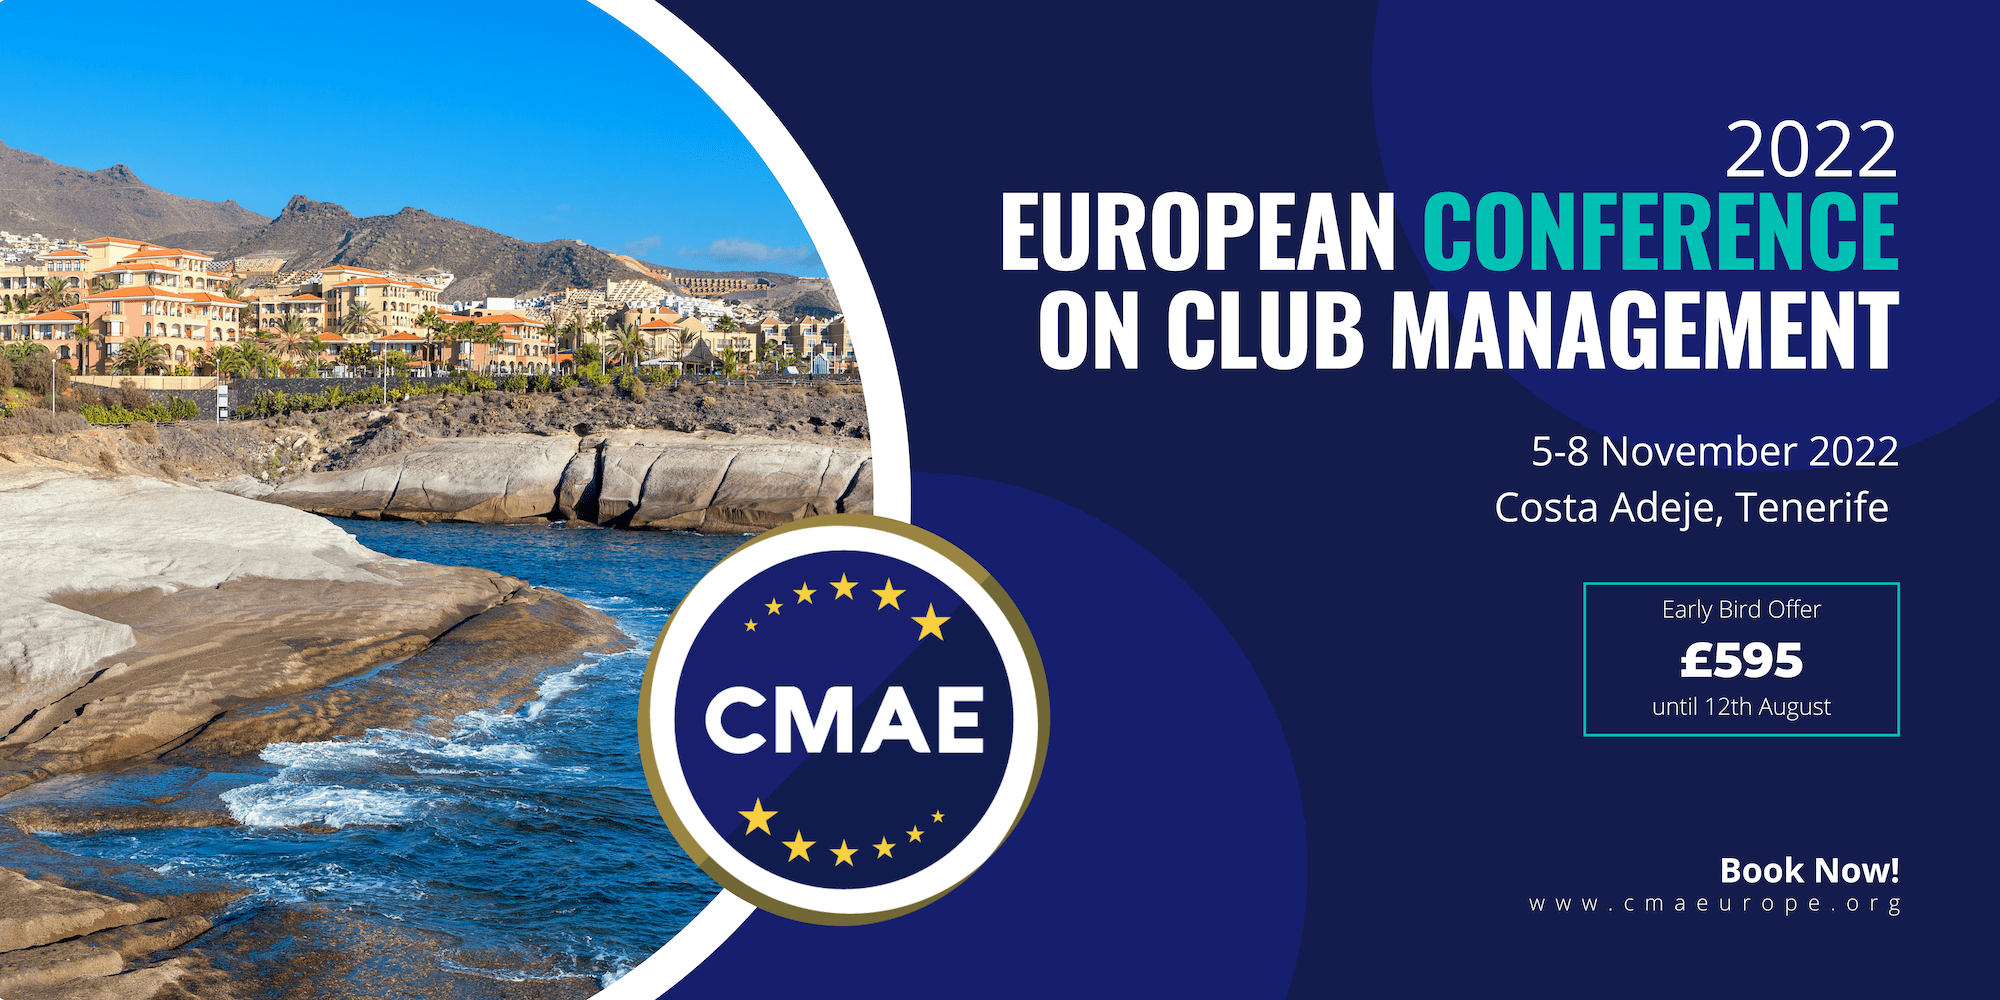 CMAE’S biggest event of the year now open for registration